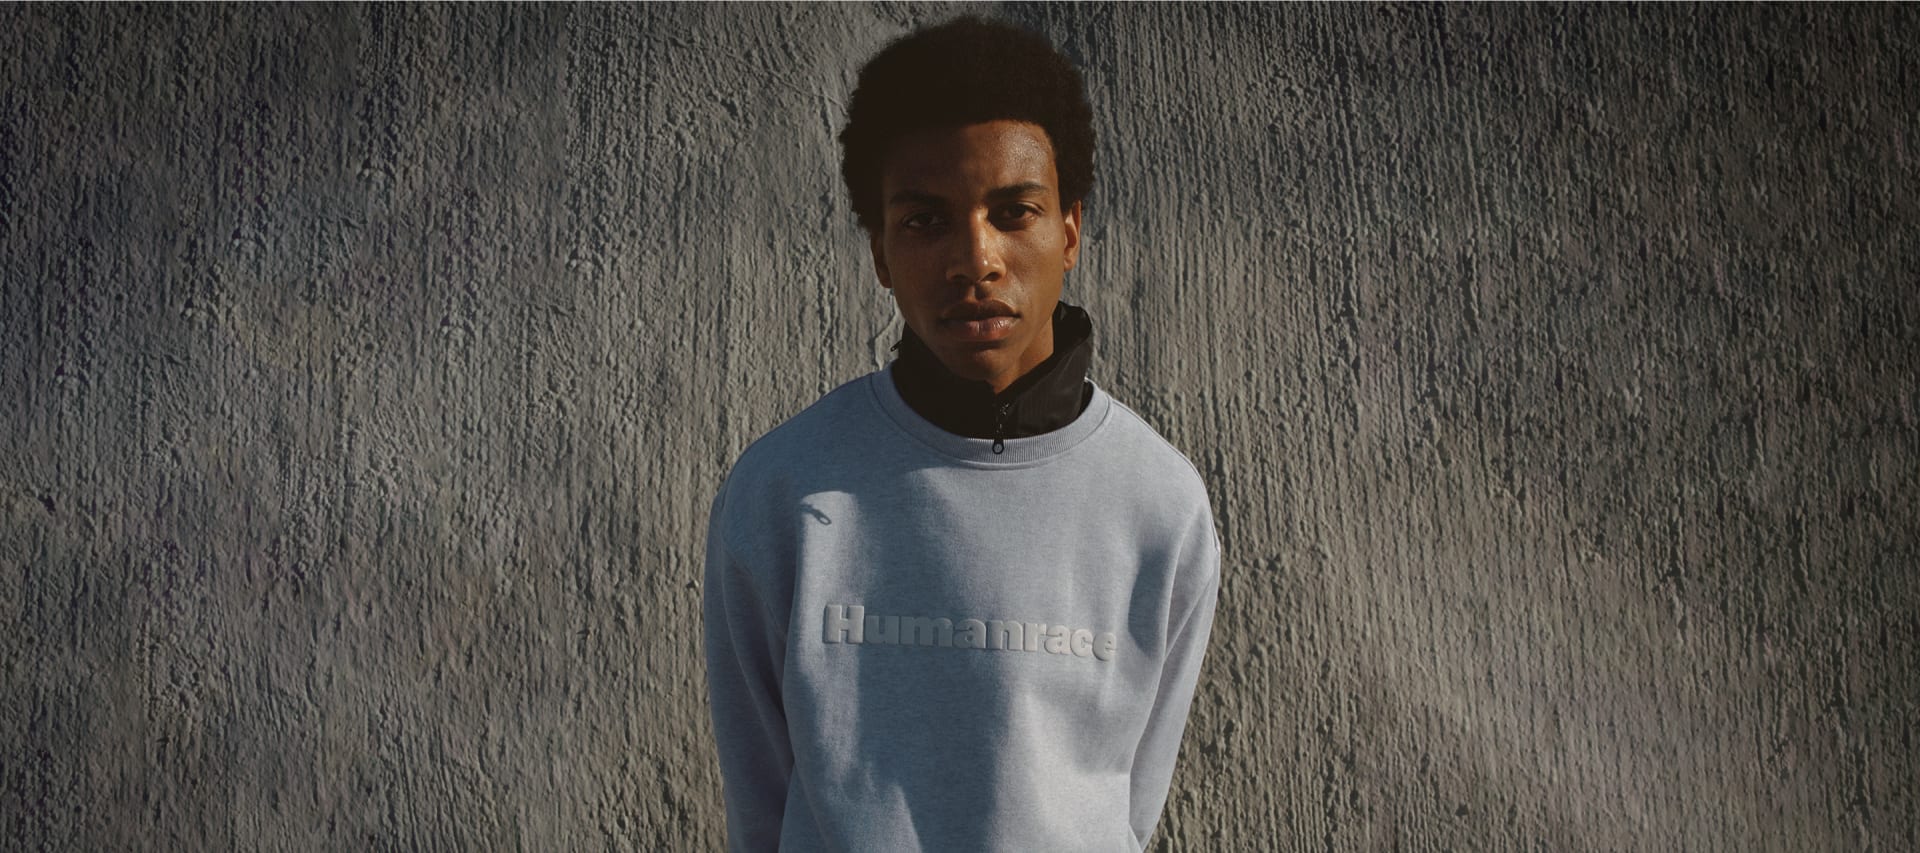 Model looks to camera wearing gray jumper against concrete background.